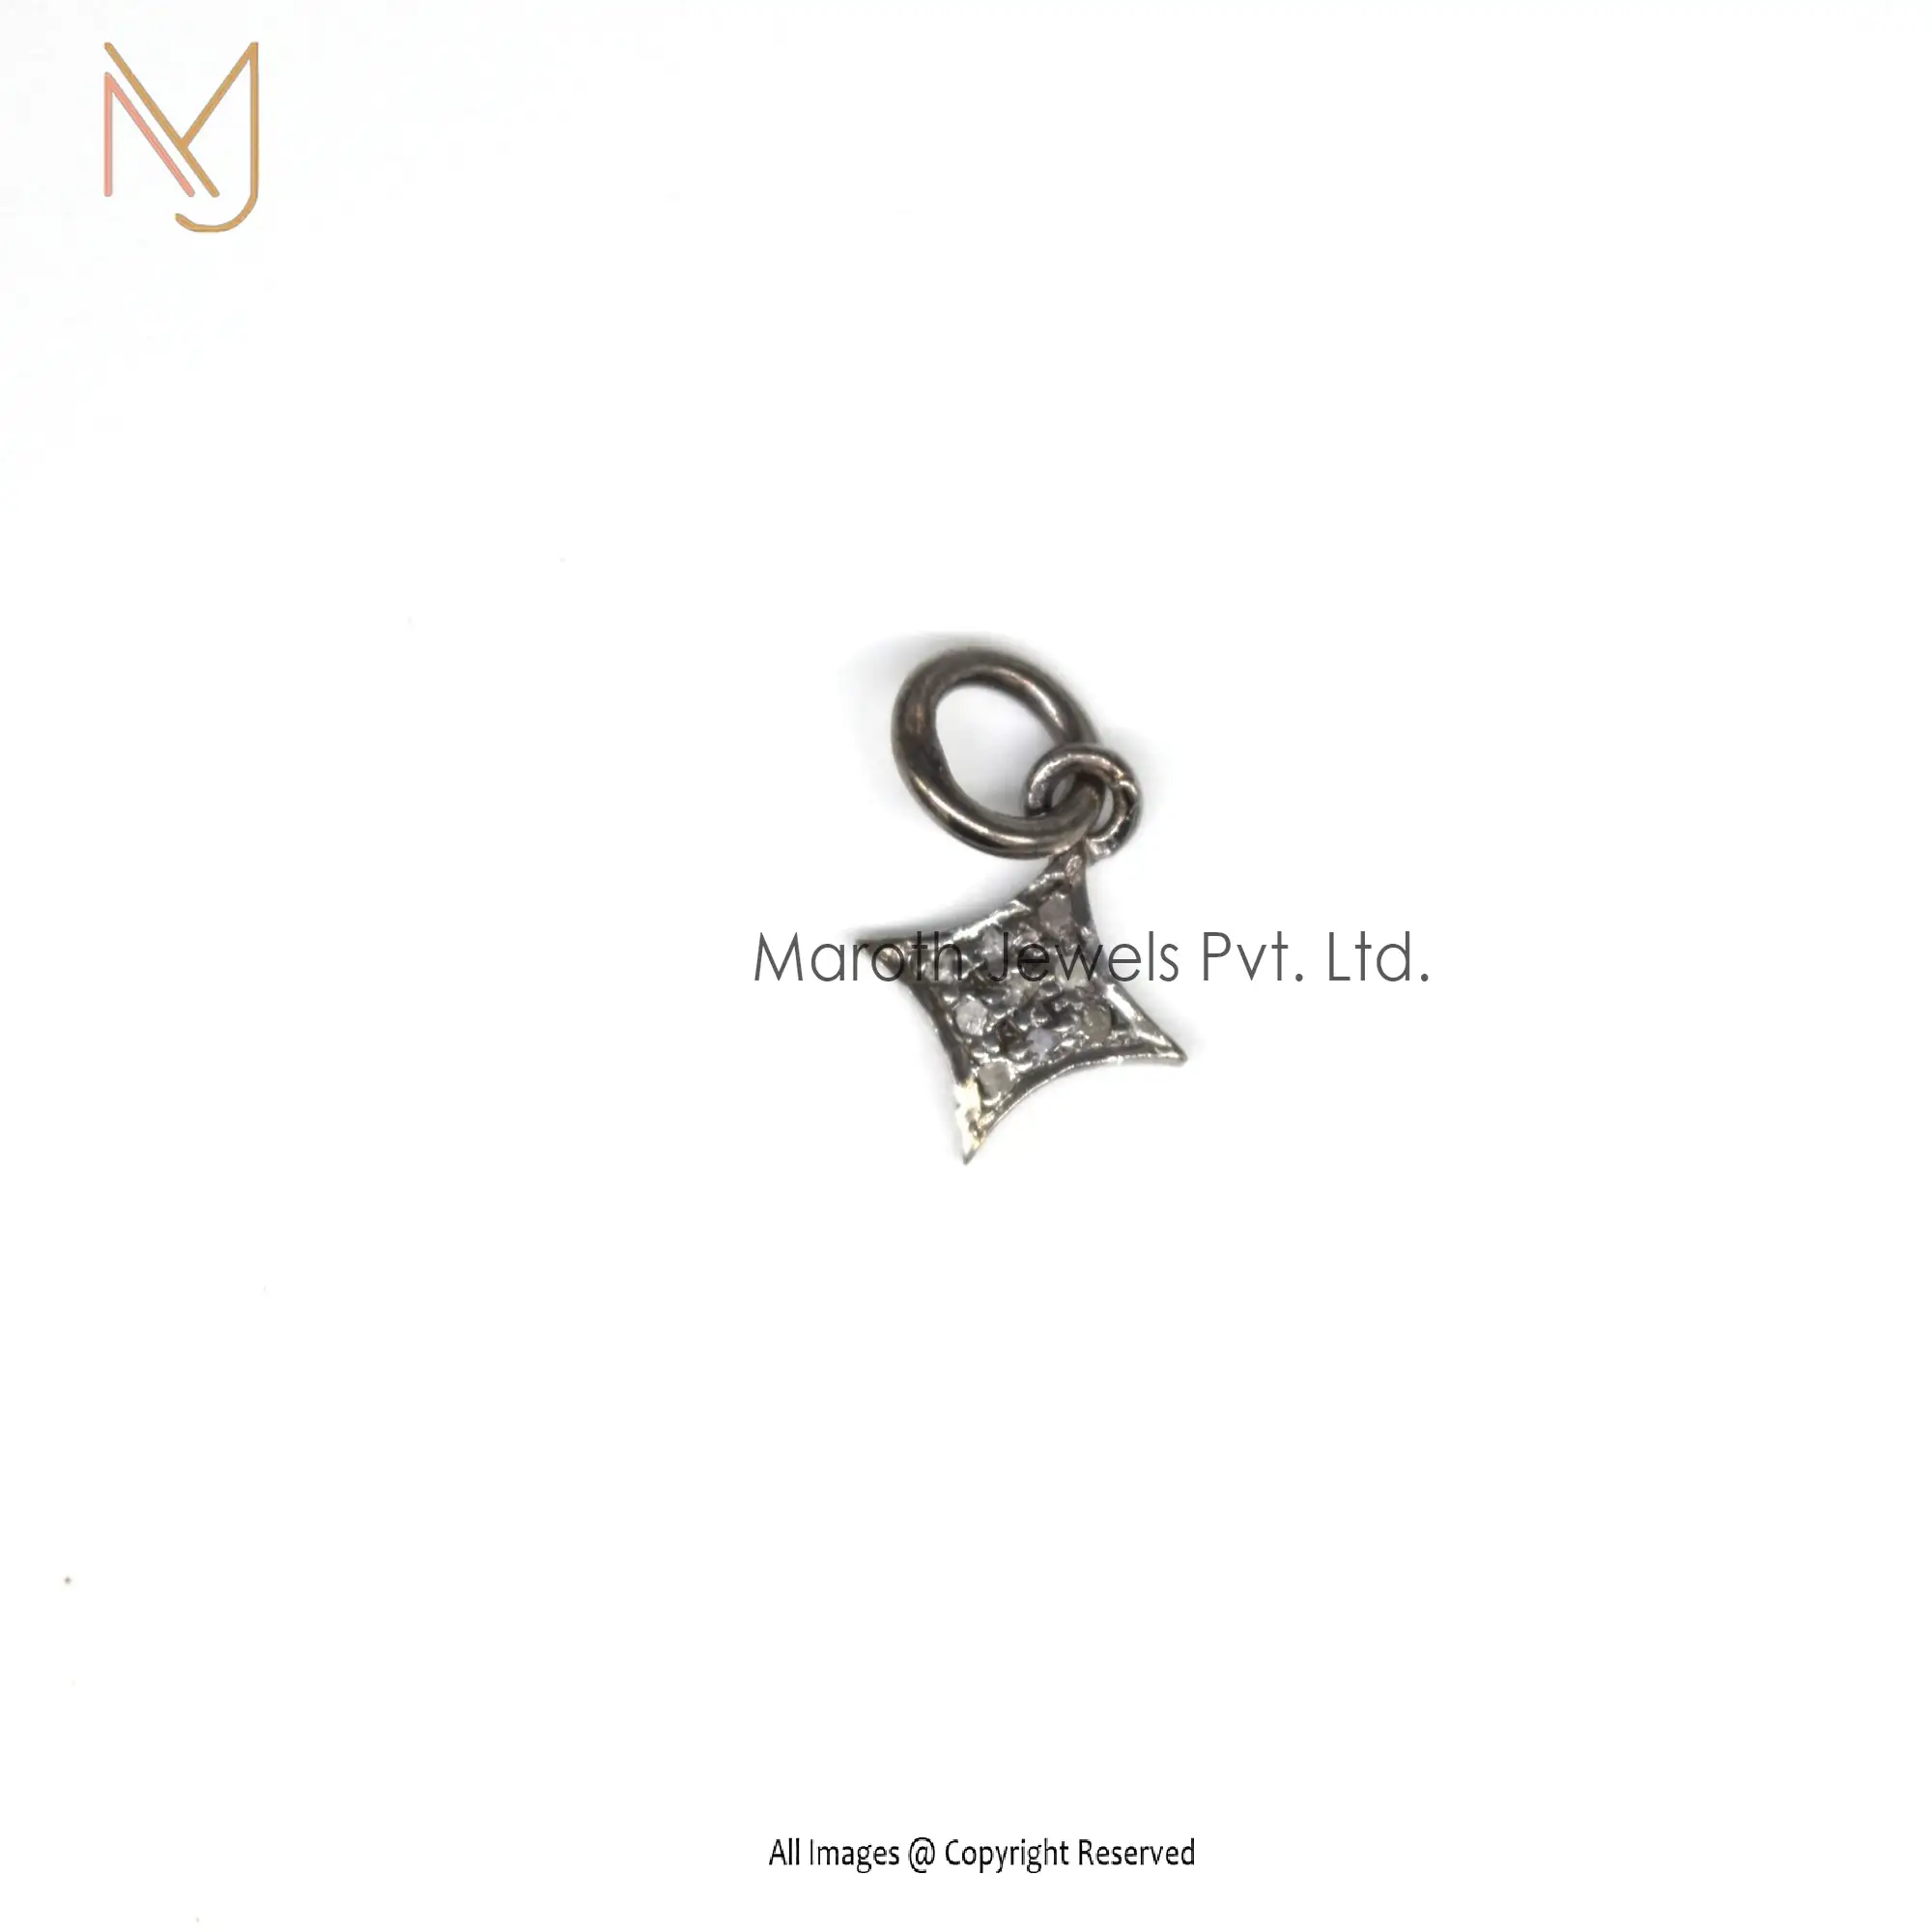 wholesale charms, wholesale charms Suppliers and Manufacturers at